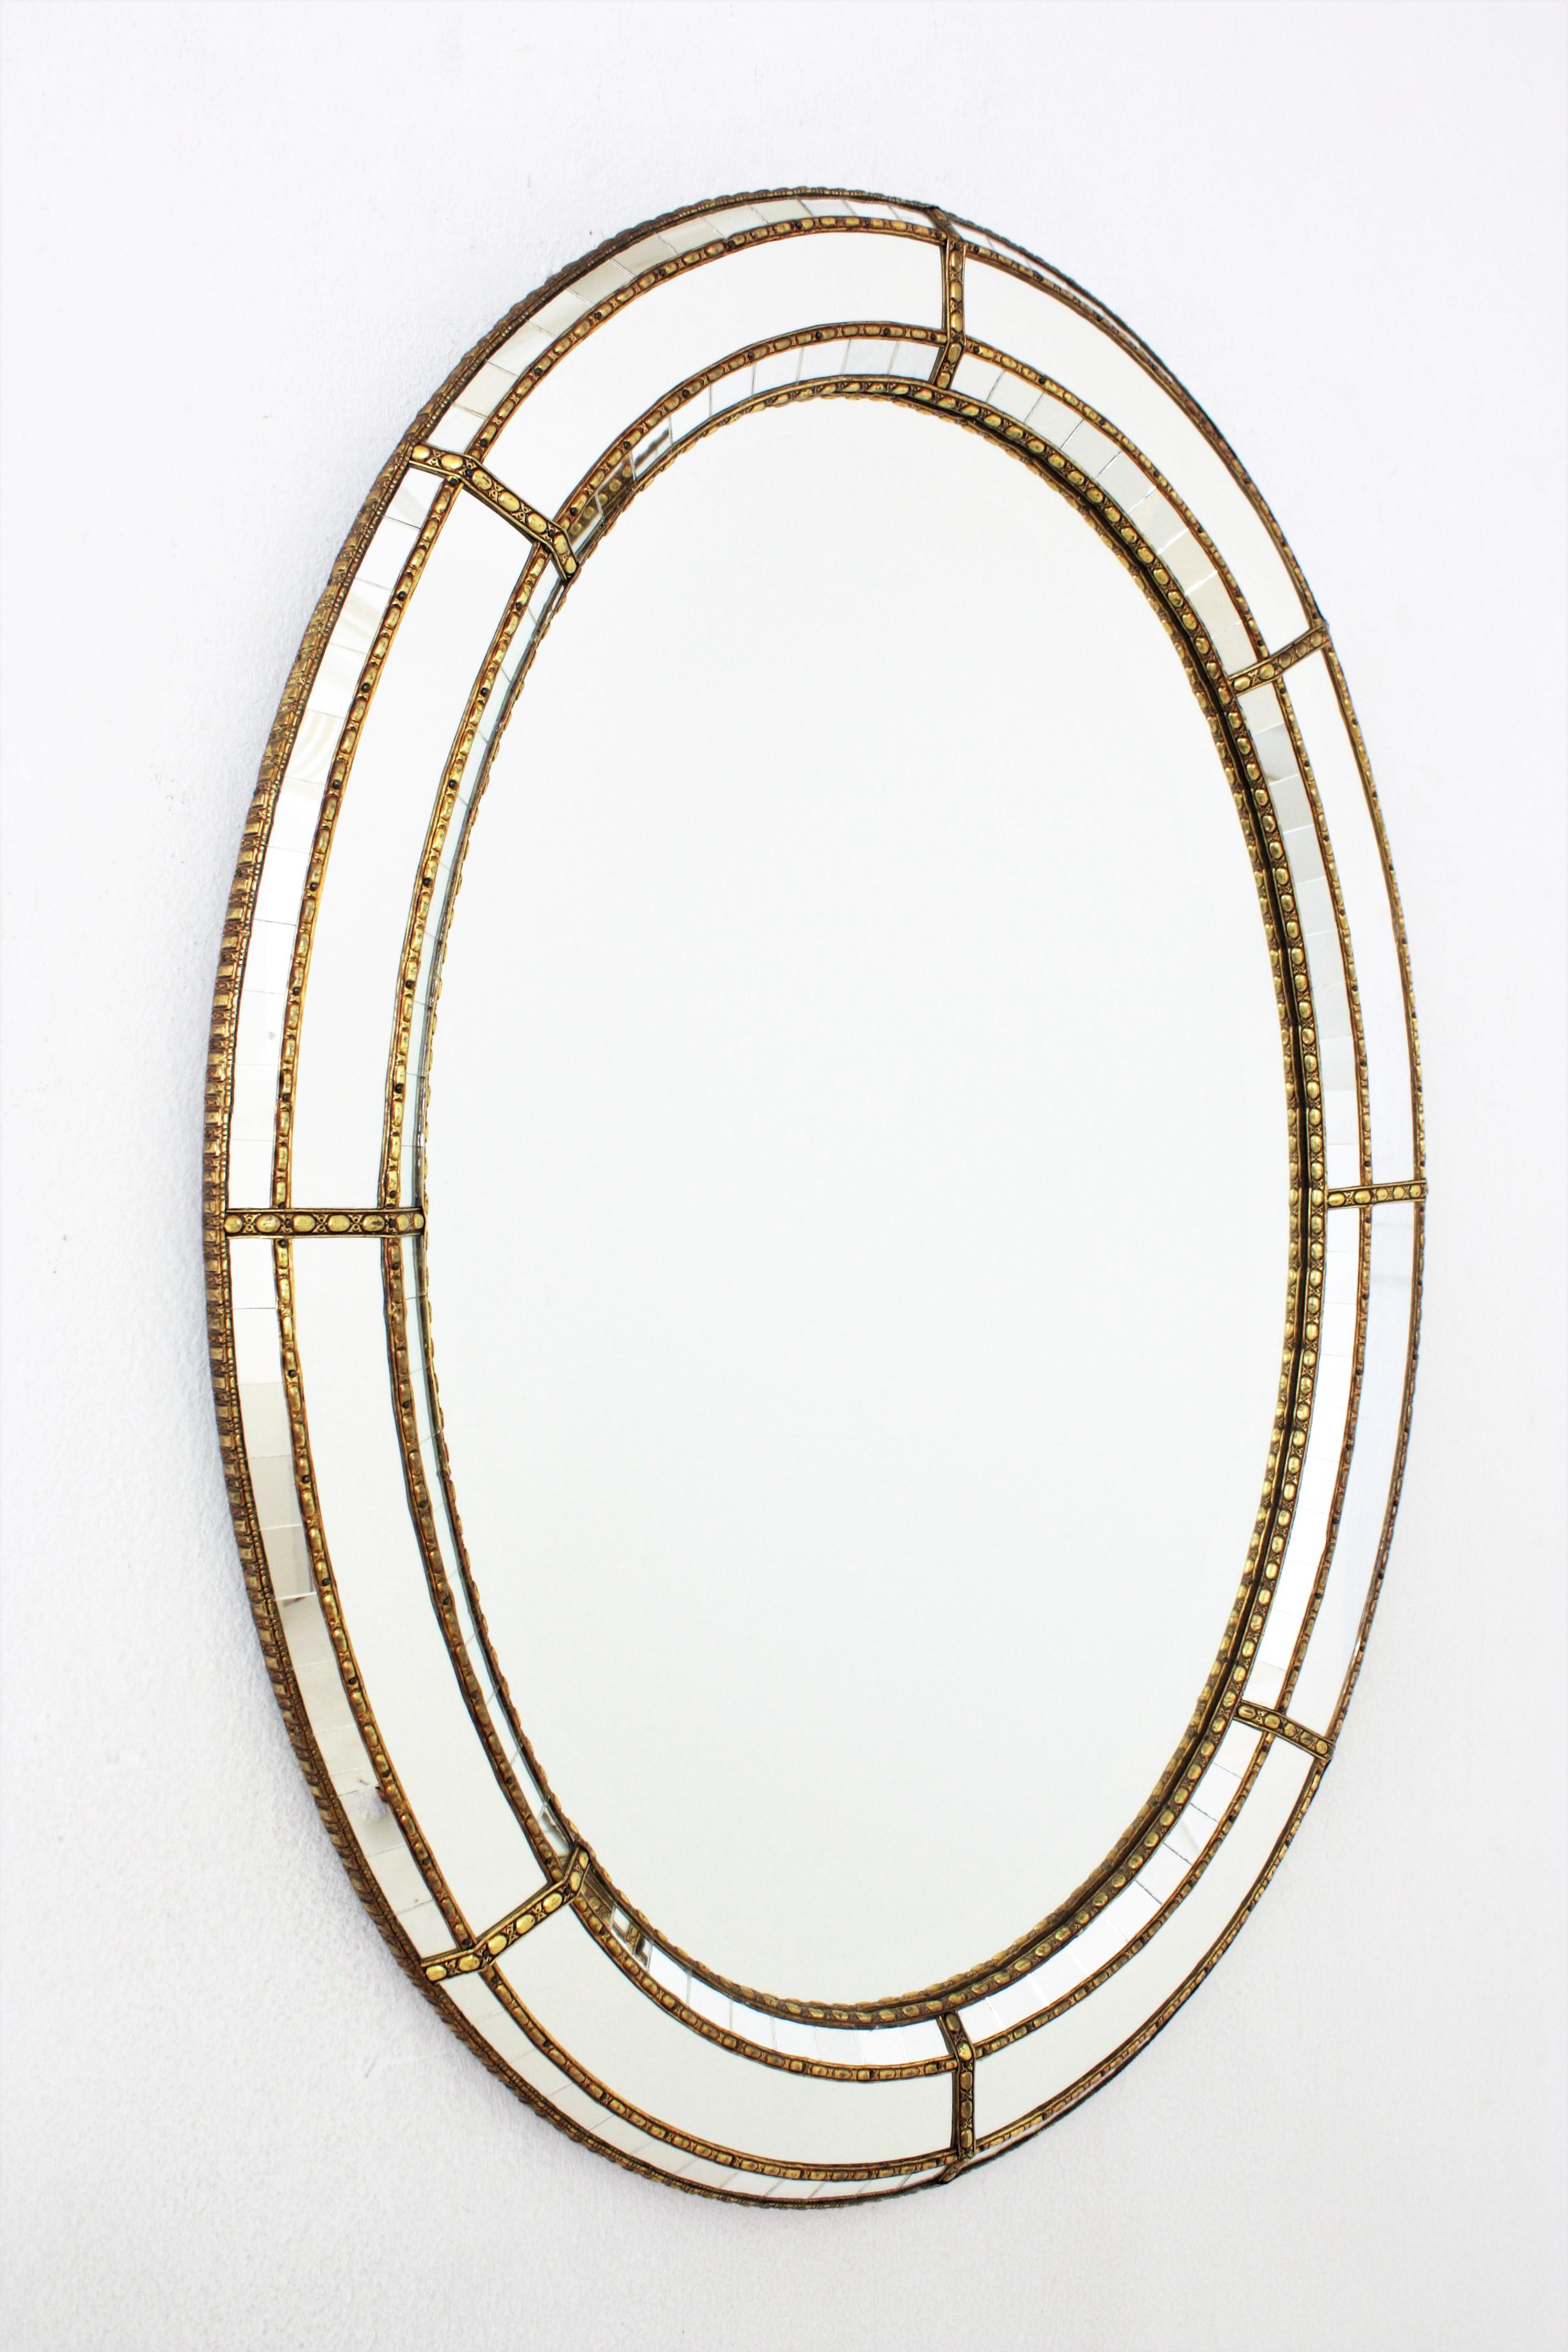 Hollywood Regency Venetian Style Oval Wall Mirror with Brass Details